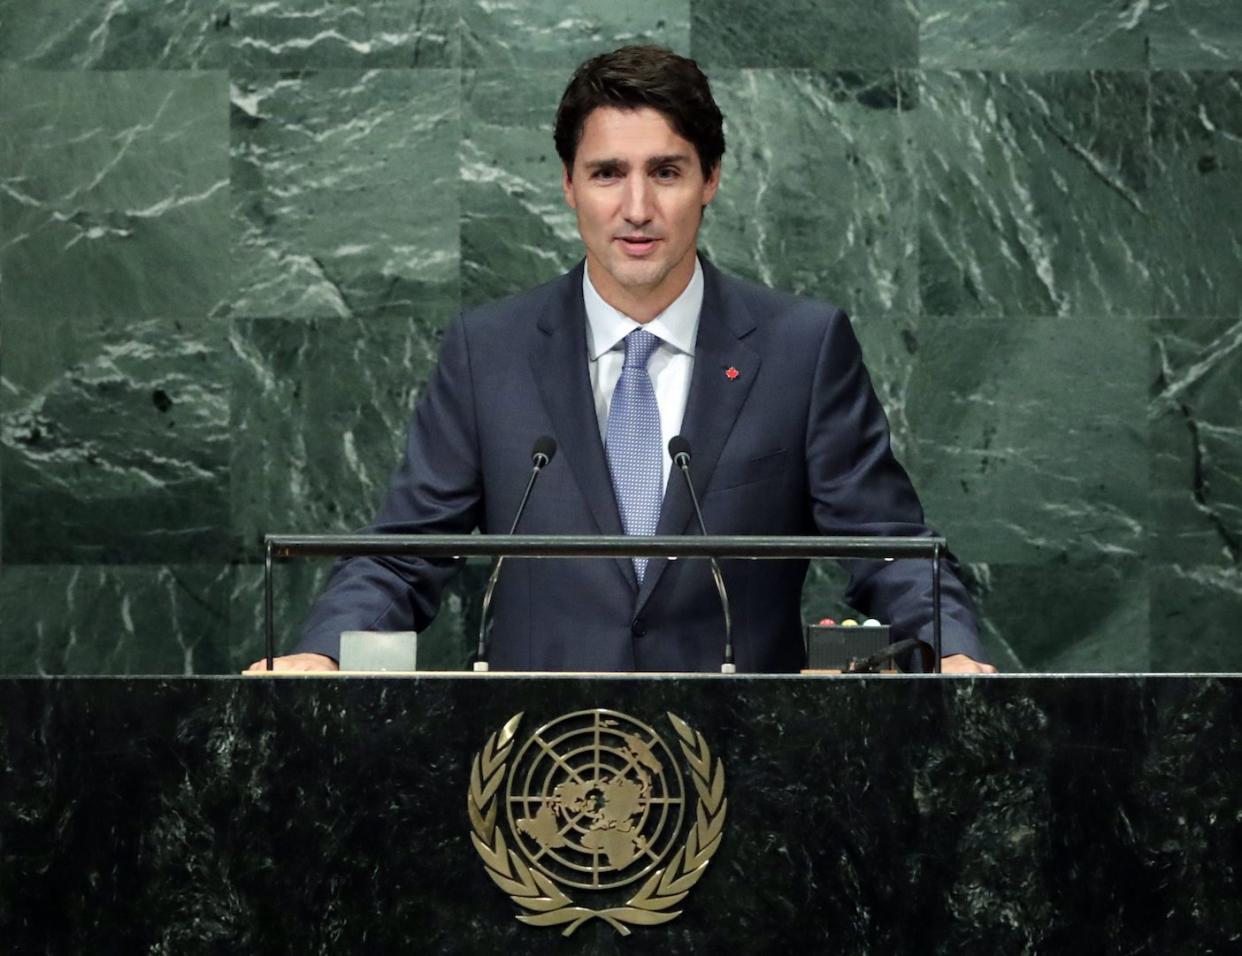 Prime Minister of Canada Justin Trudeau addresses the General Debate of the 71st Session of the United Nations General Assembly at UN headquarters in New York City. Photo from CP Images